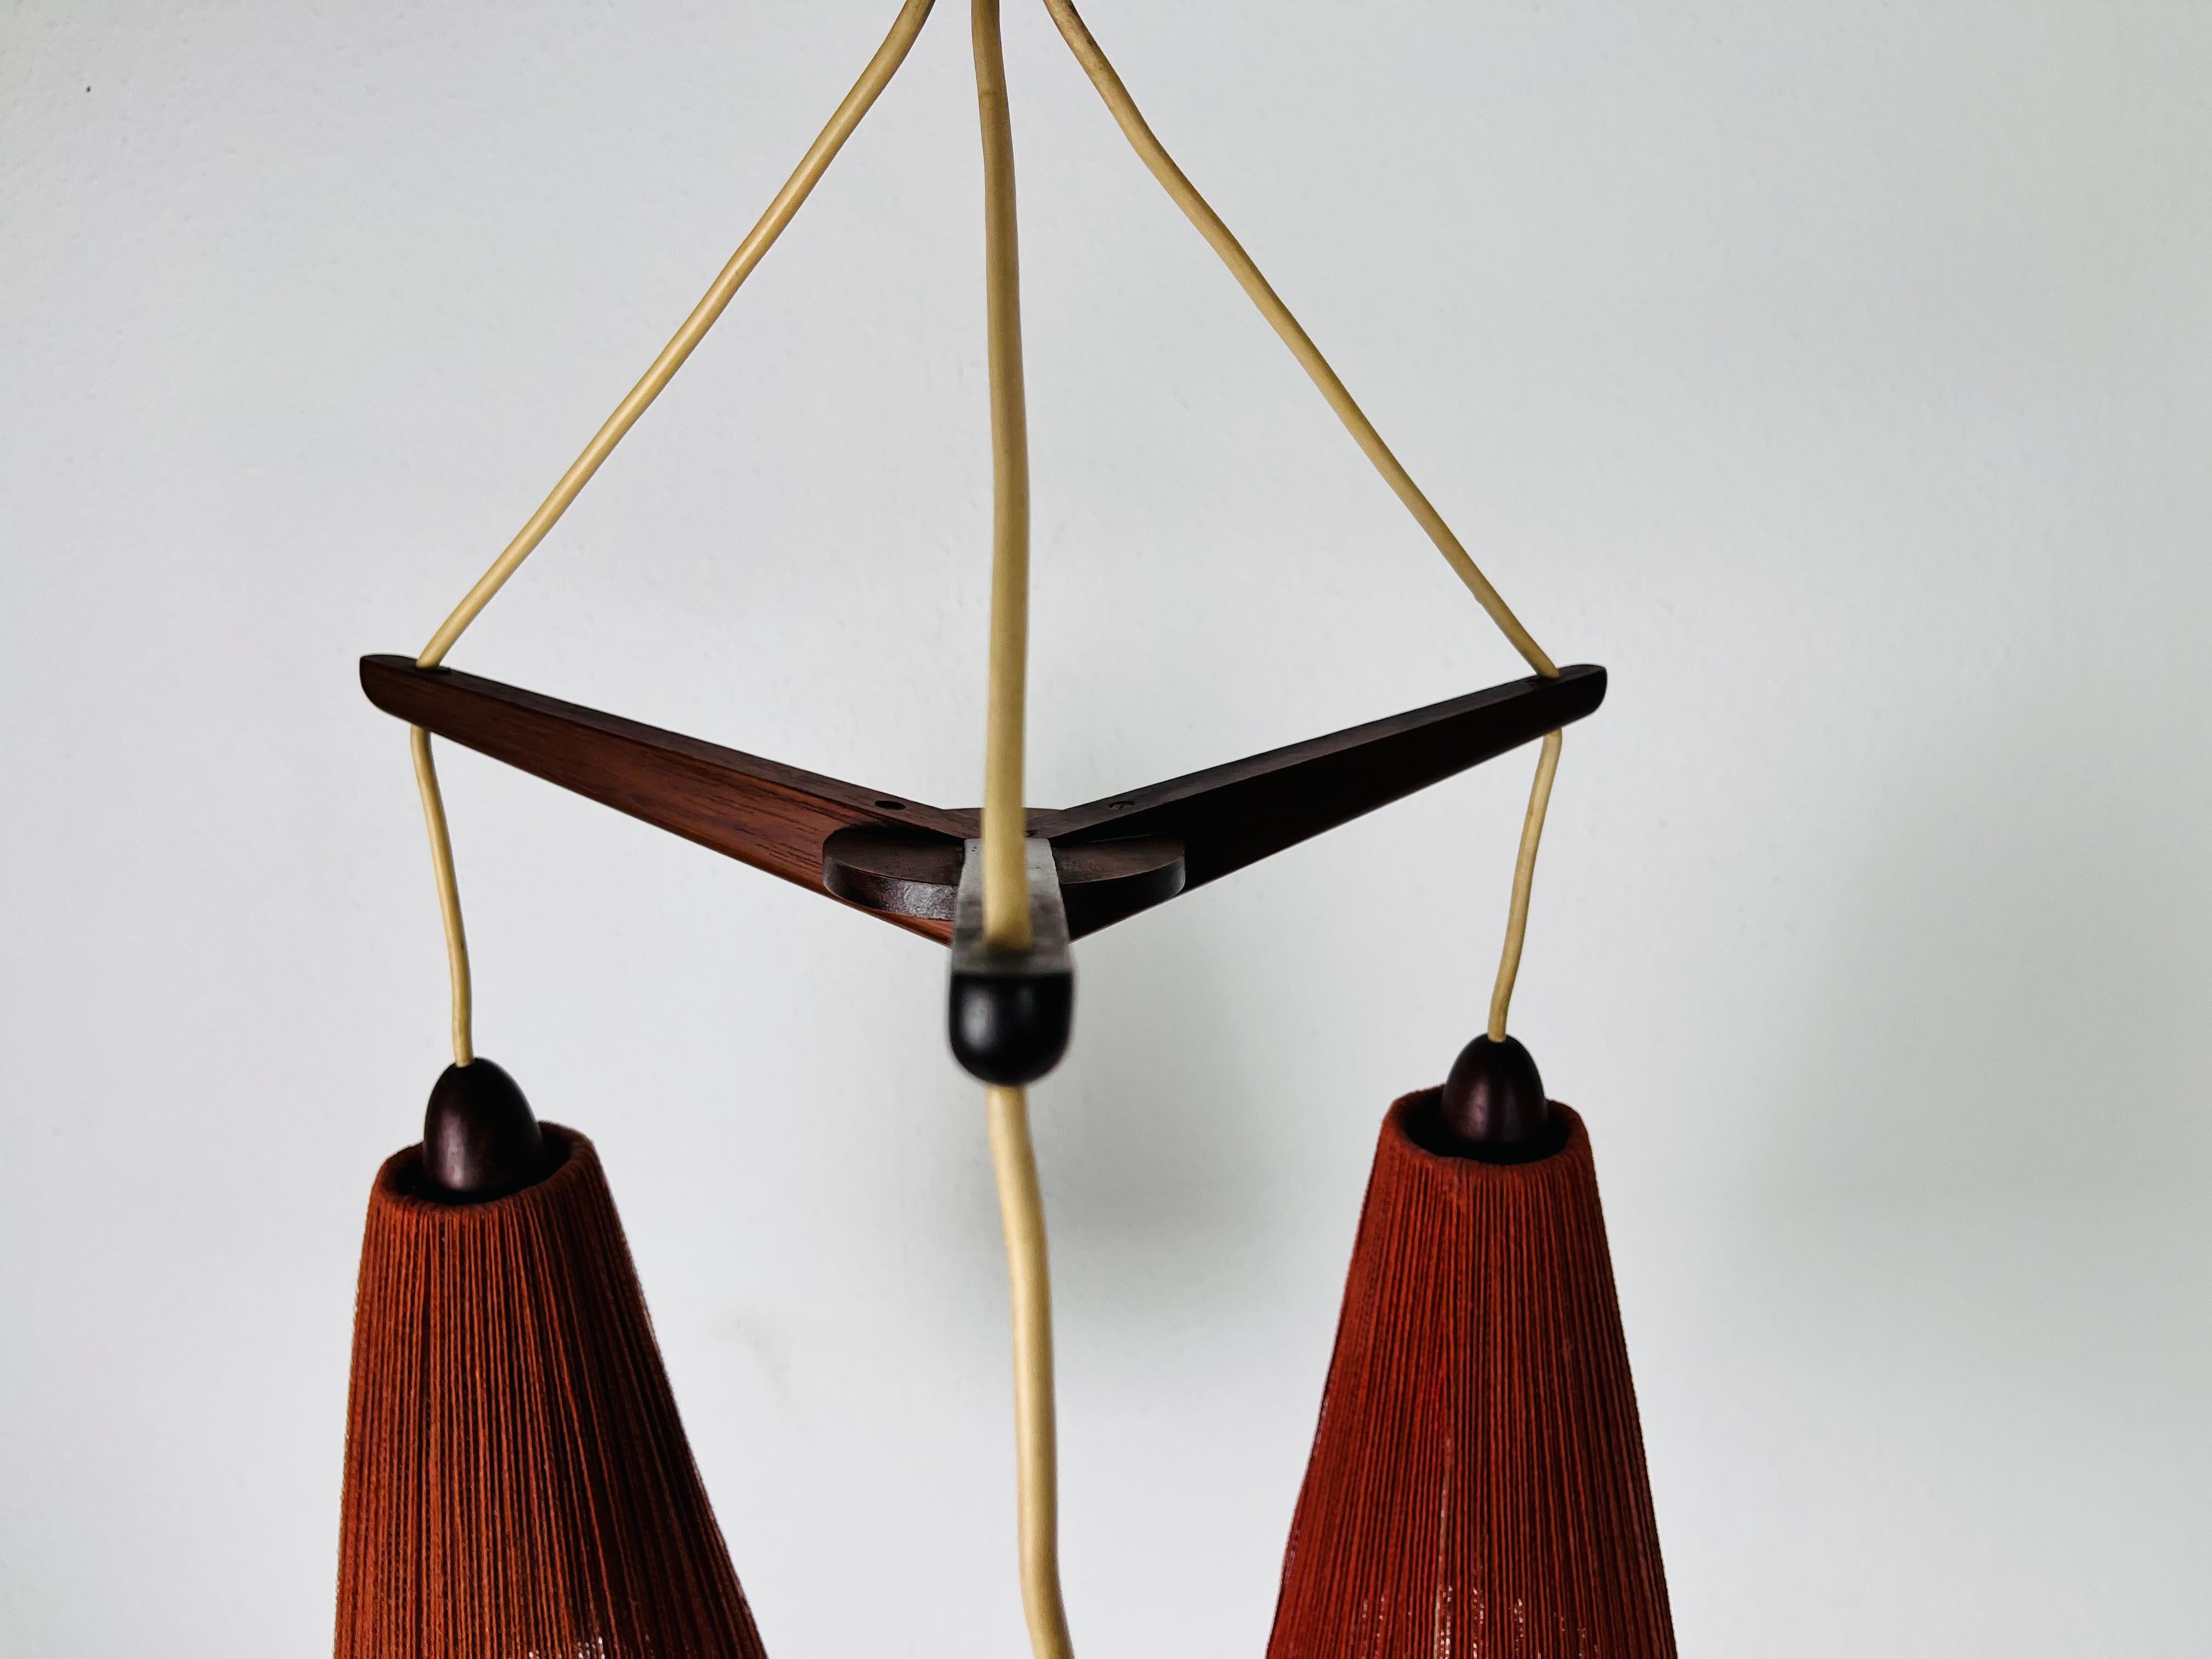 Mid-20th Century Midcentury Teak and Cord Shade Hanging Lamp by Temde, circa 1960 For Sale